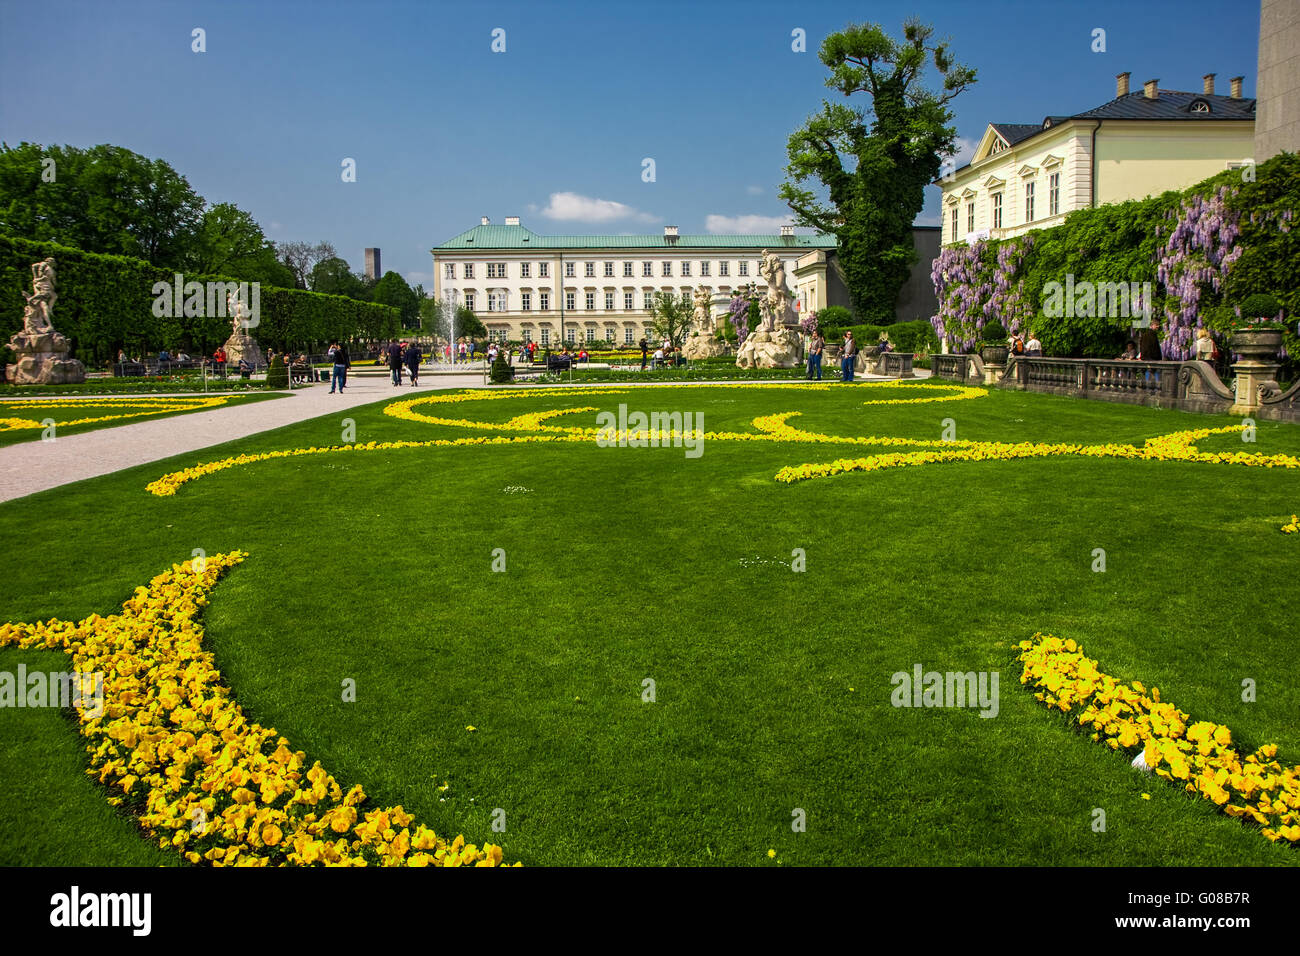 SALZBURG, AUSTRIA - Mai 1, 2009 - View to Mirabell Palace and Gardens in Salzburg. Gardens were opened to public in 1854. Stock Photo